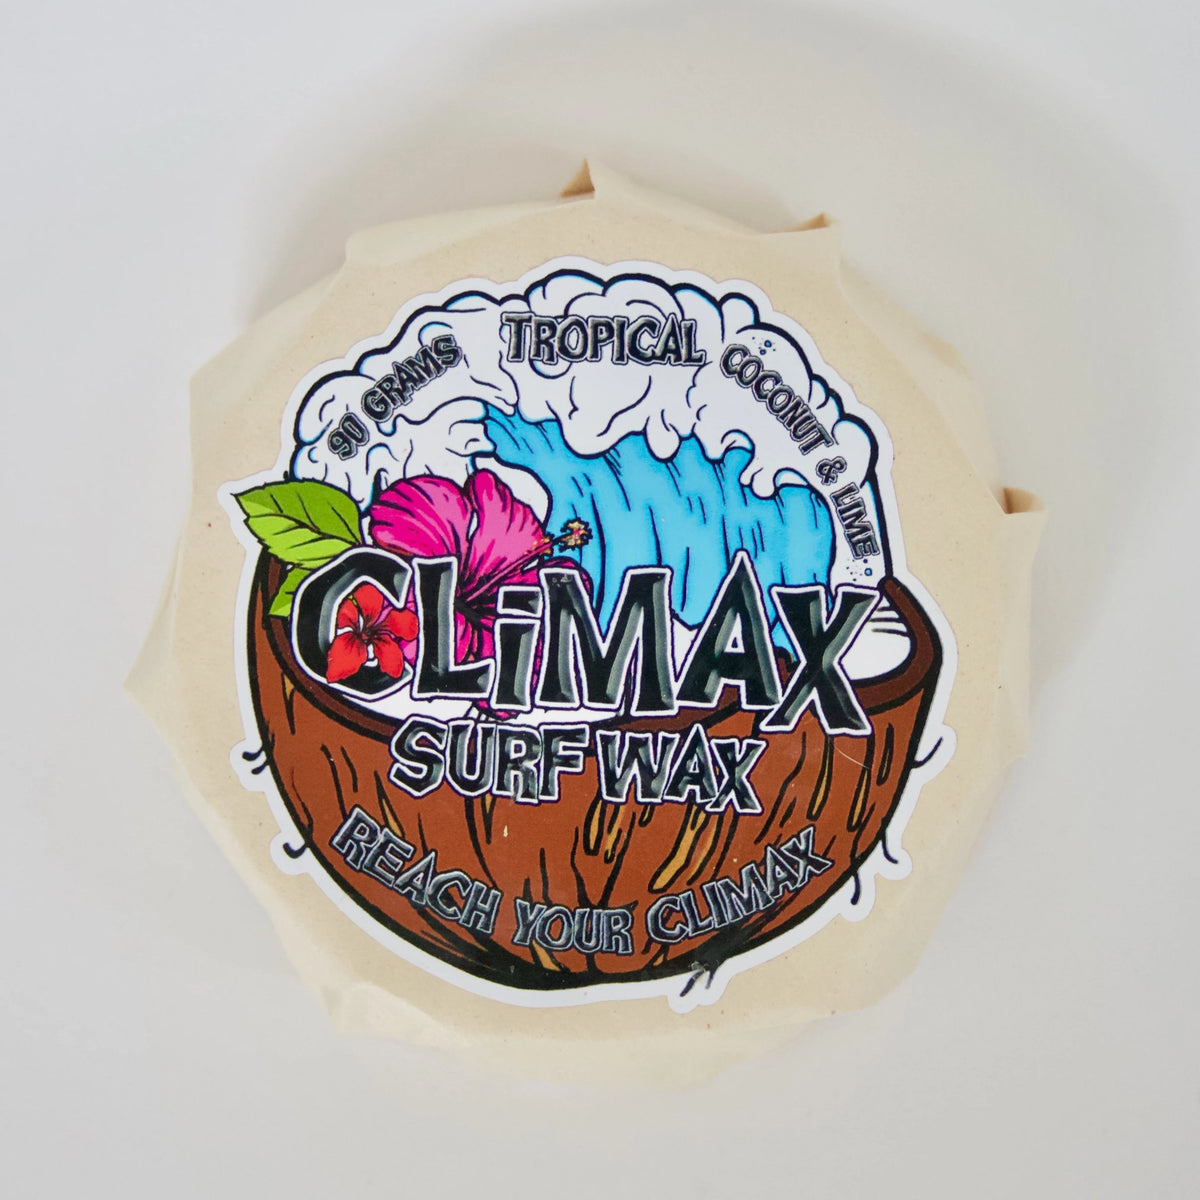 Sexwax Products / Buy Online New Zealand Top Prices - Ola Surf & Lifestyle